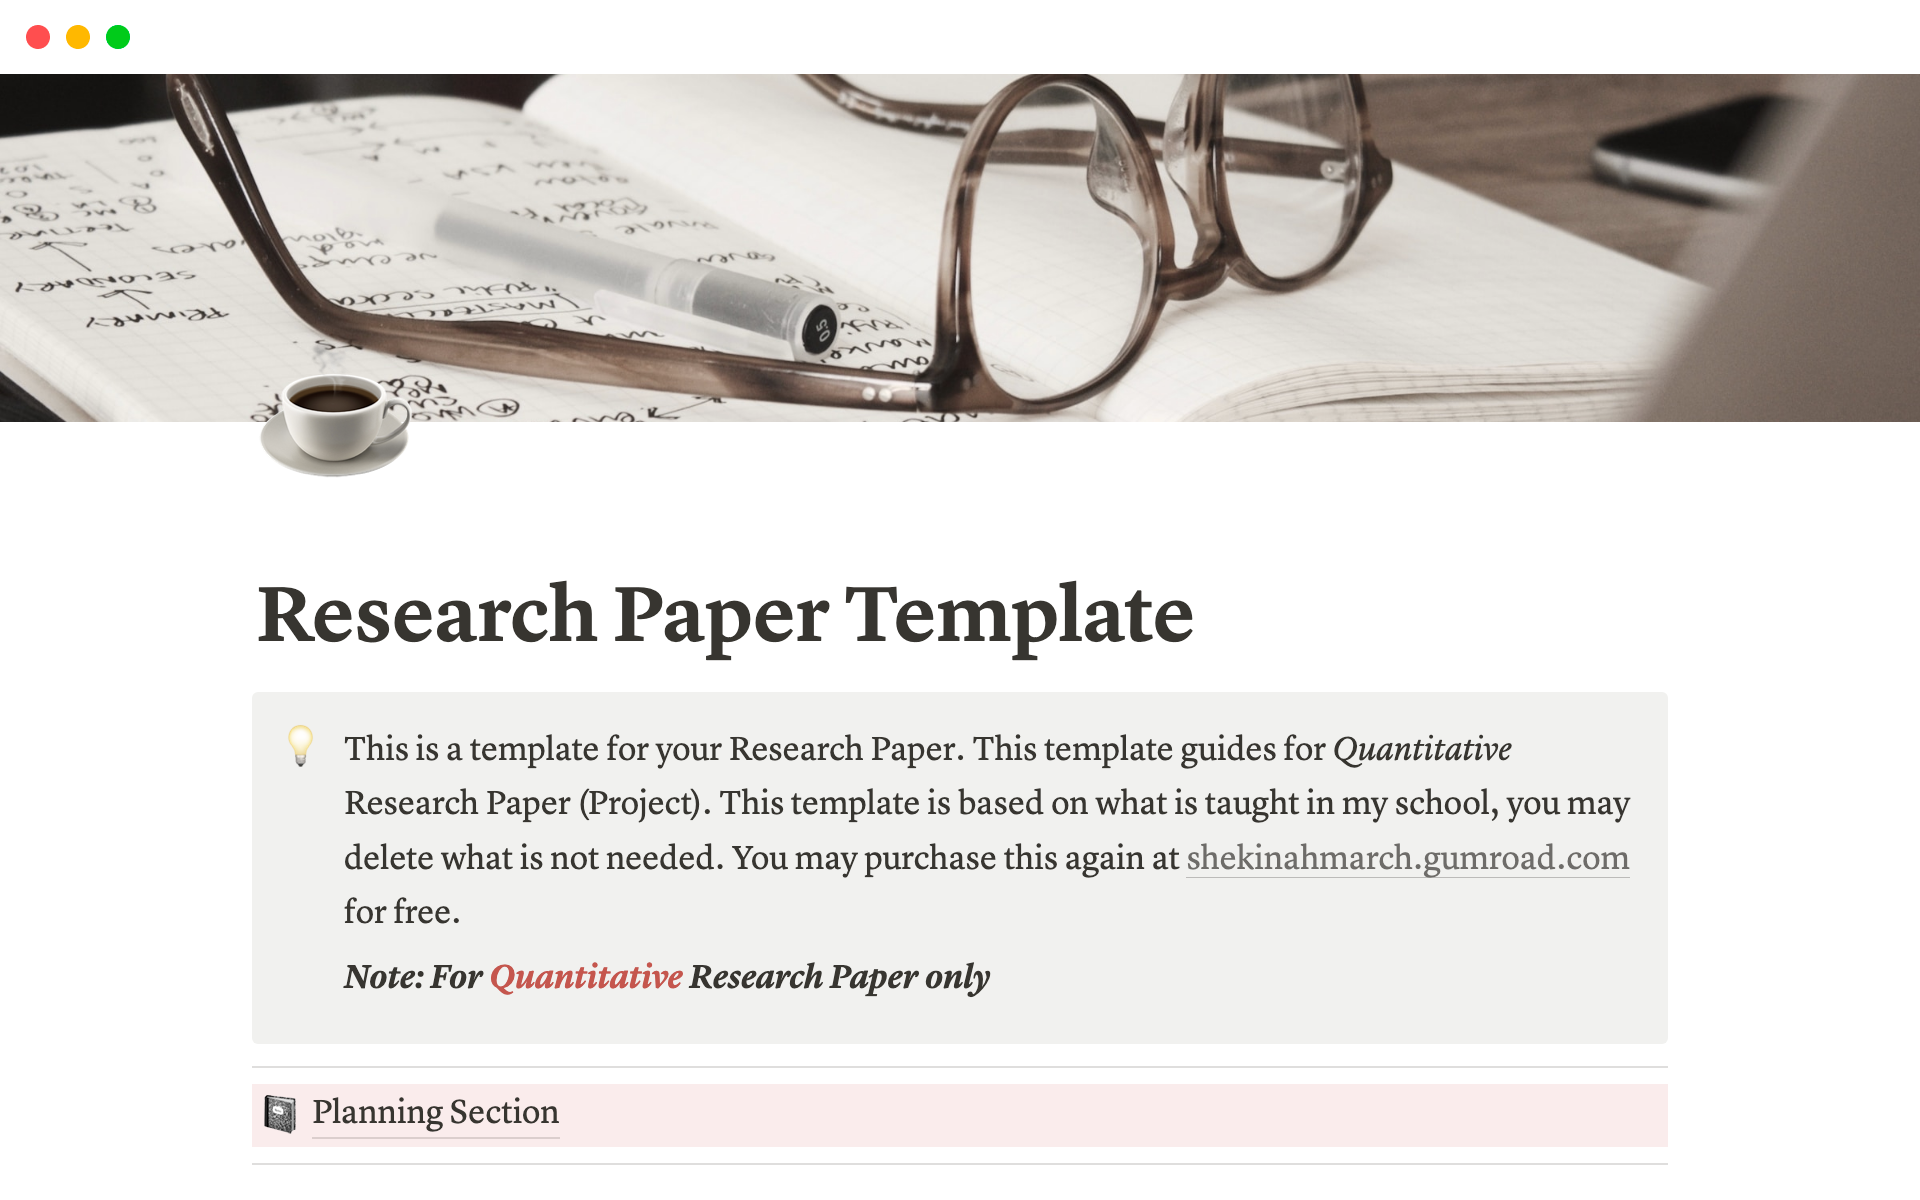 A template preview for Research Paper 1.0